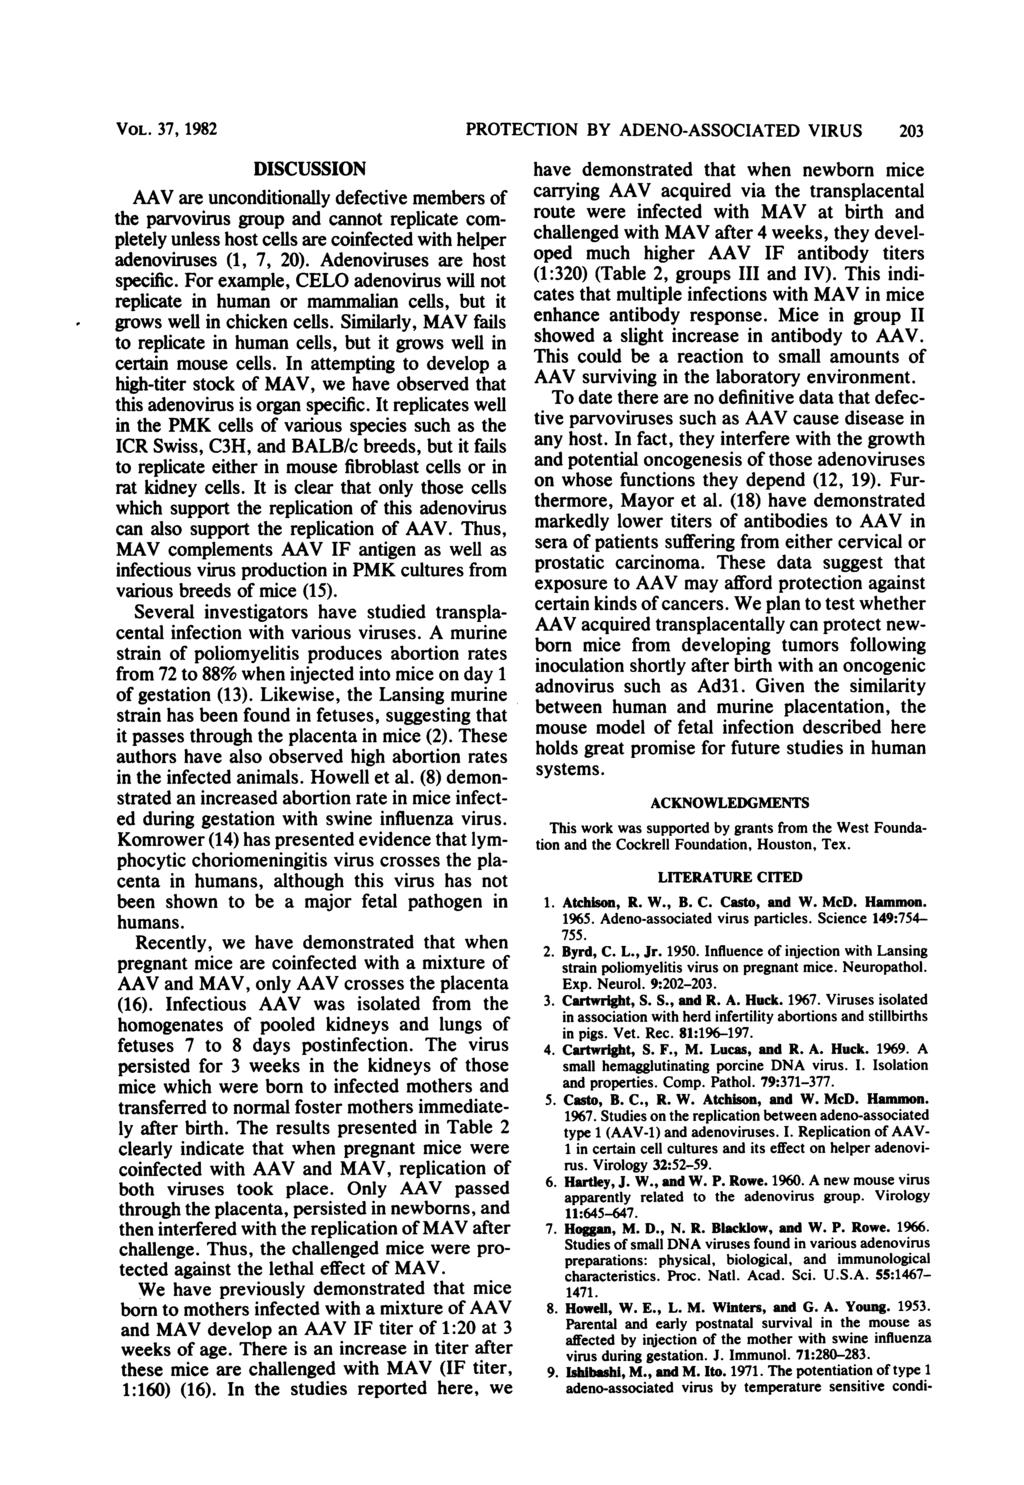 VOL. 37, 1982 DISCUSSION AAV are unconditionally defective members of the parvovirus group and cannot replicate completely unless host cells are coinfected with helper adenoviruses (1, 7, 20).